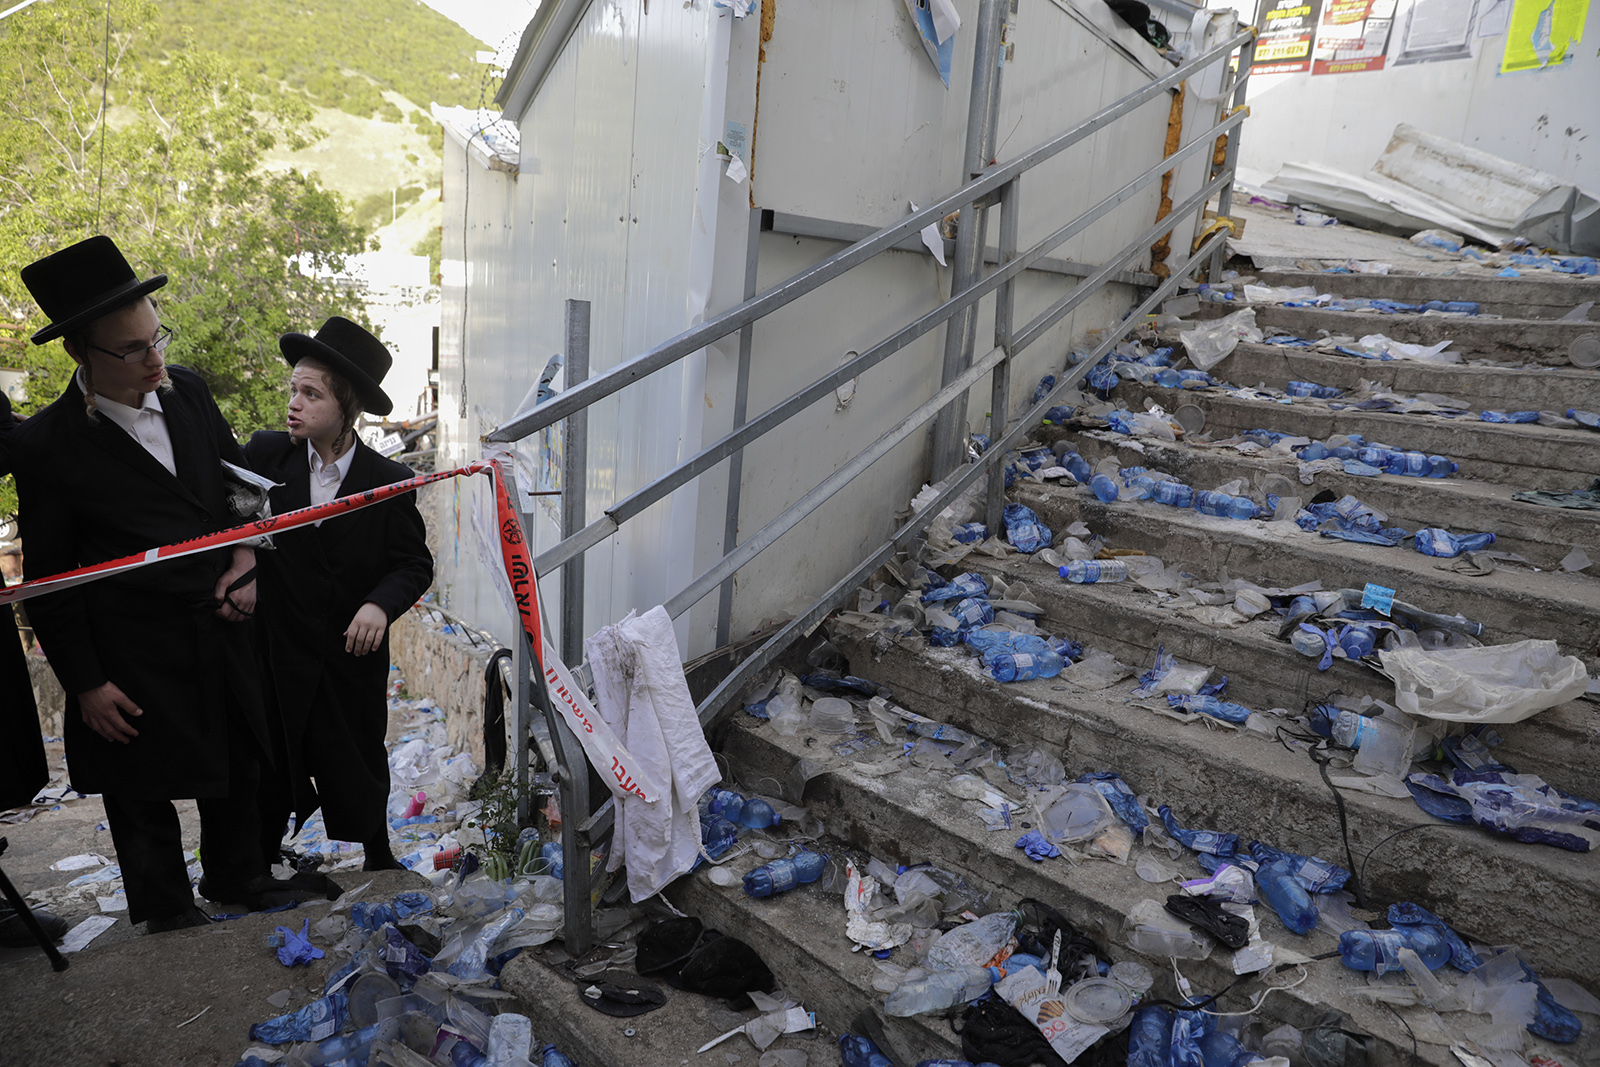 Ultra-Orthodox Jews look at the scene where fatalities were reported among the thousands of ultra-Orthodox Jews during the Lag b’Omer festival at Mount Meron in northern Israel, Friday, April 30, 2021. A stampede at the religious festival attended by tens of thousands of ultra-Orthodox Jews in northern Israel killed dozens of people and injured more than 100 others early Friday, medical officials said, in one of the country's deadliest civilian disasters. (AP Photo/Sebastian Scheiner)